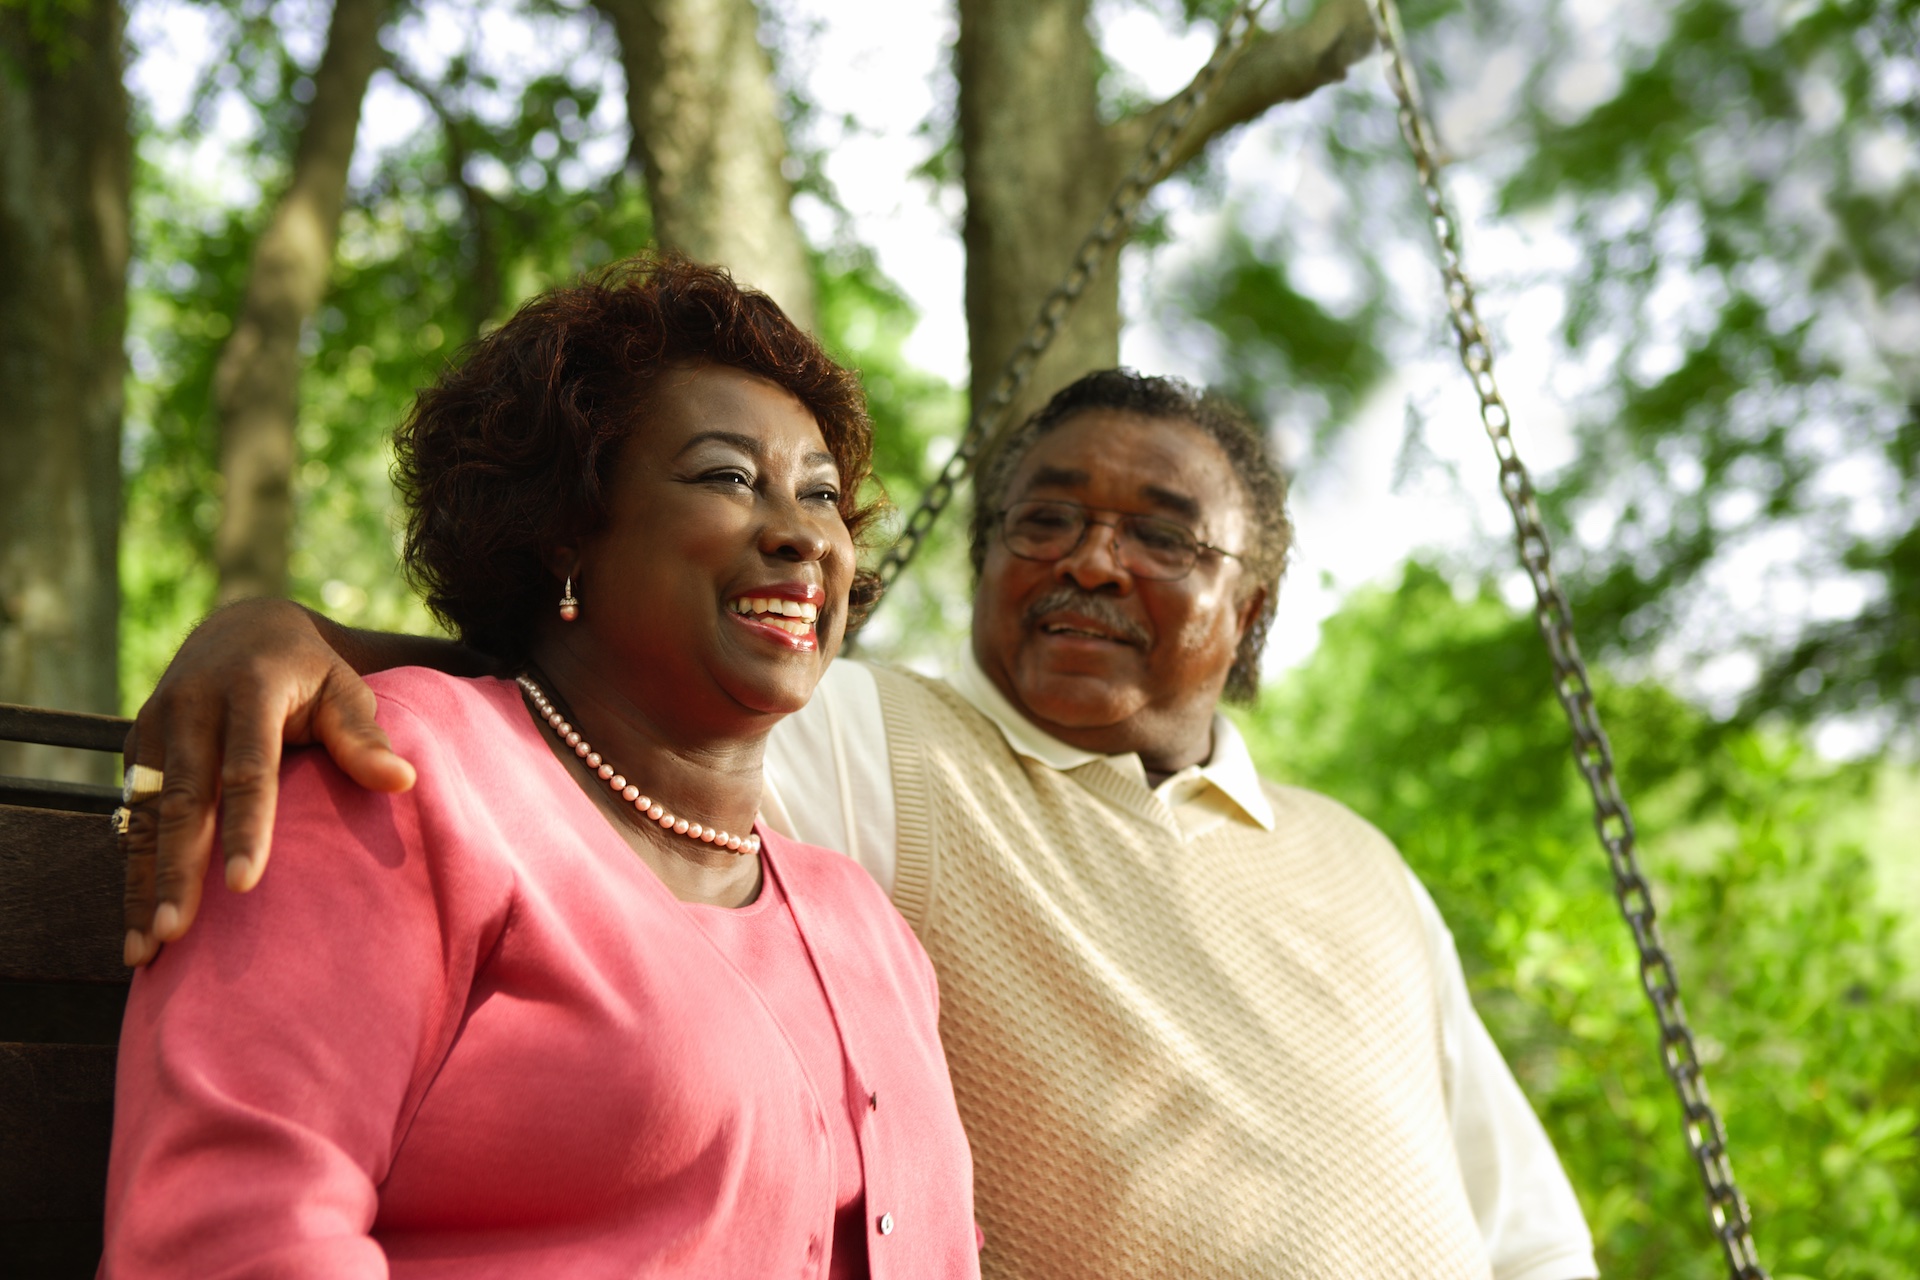 Study of dementia and healthy brain aging in Black Americans extended for 5 years